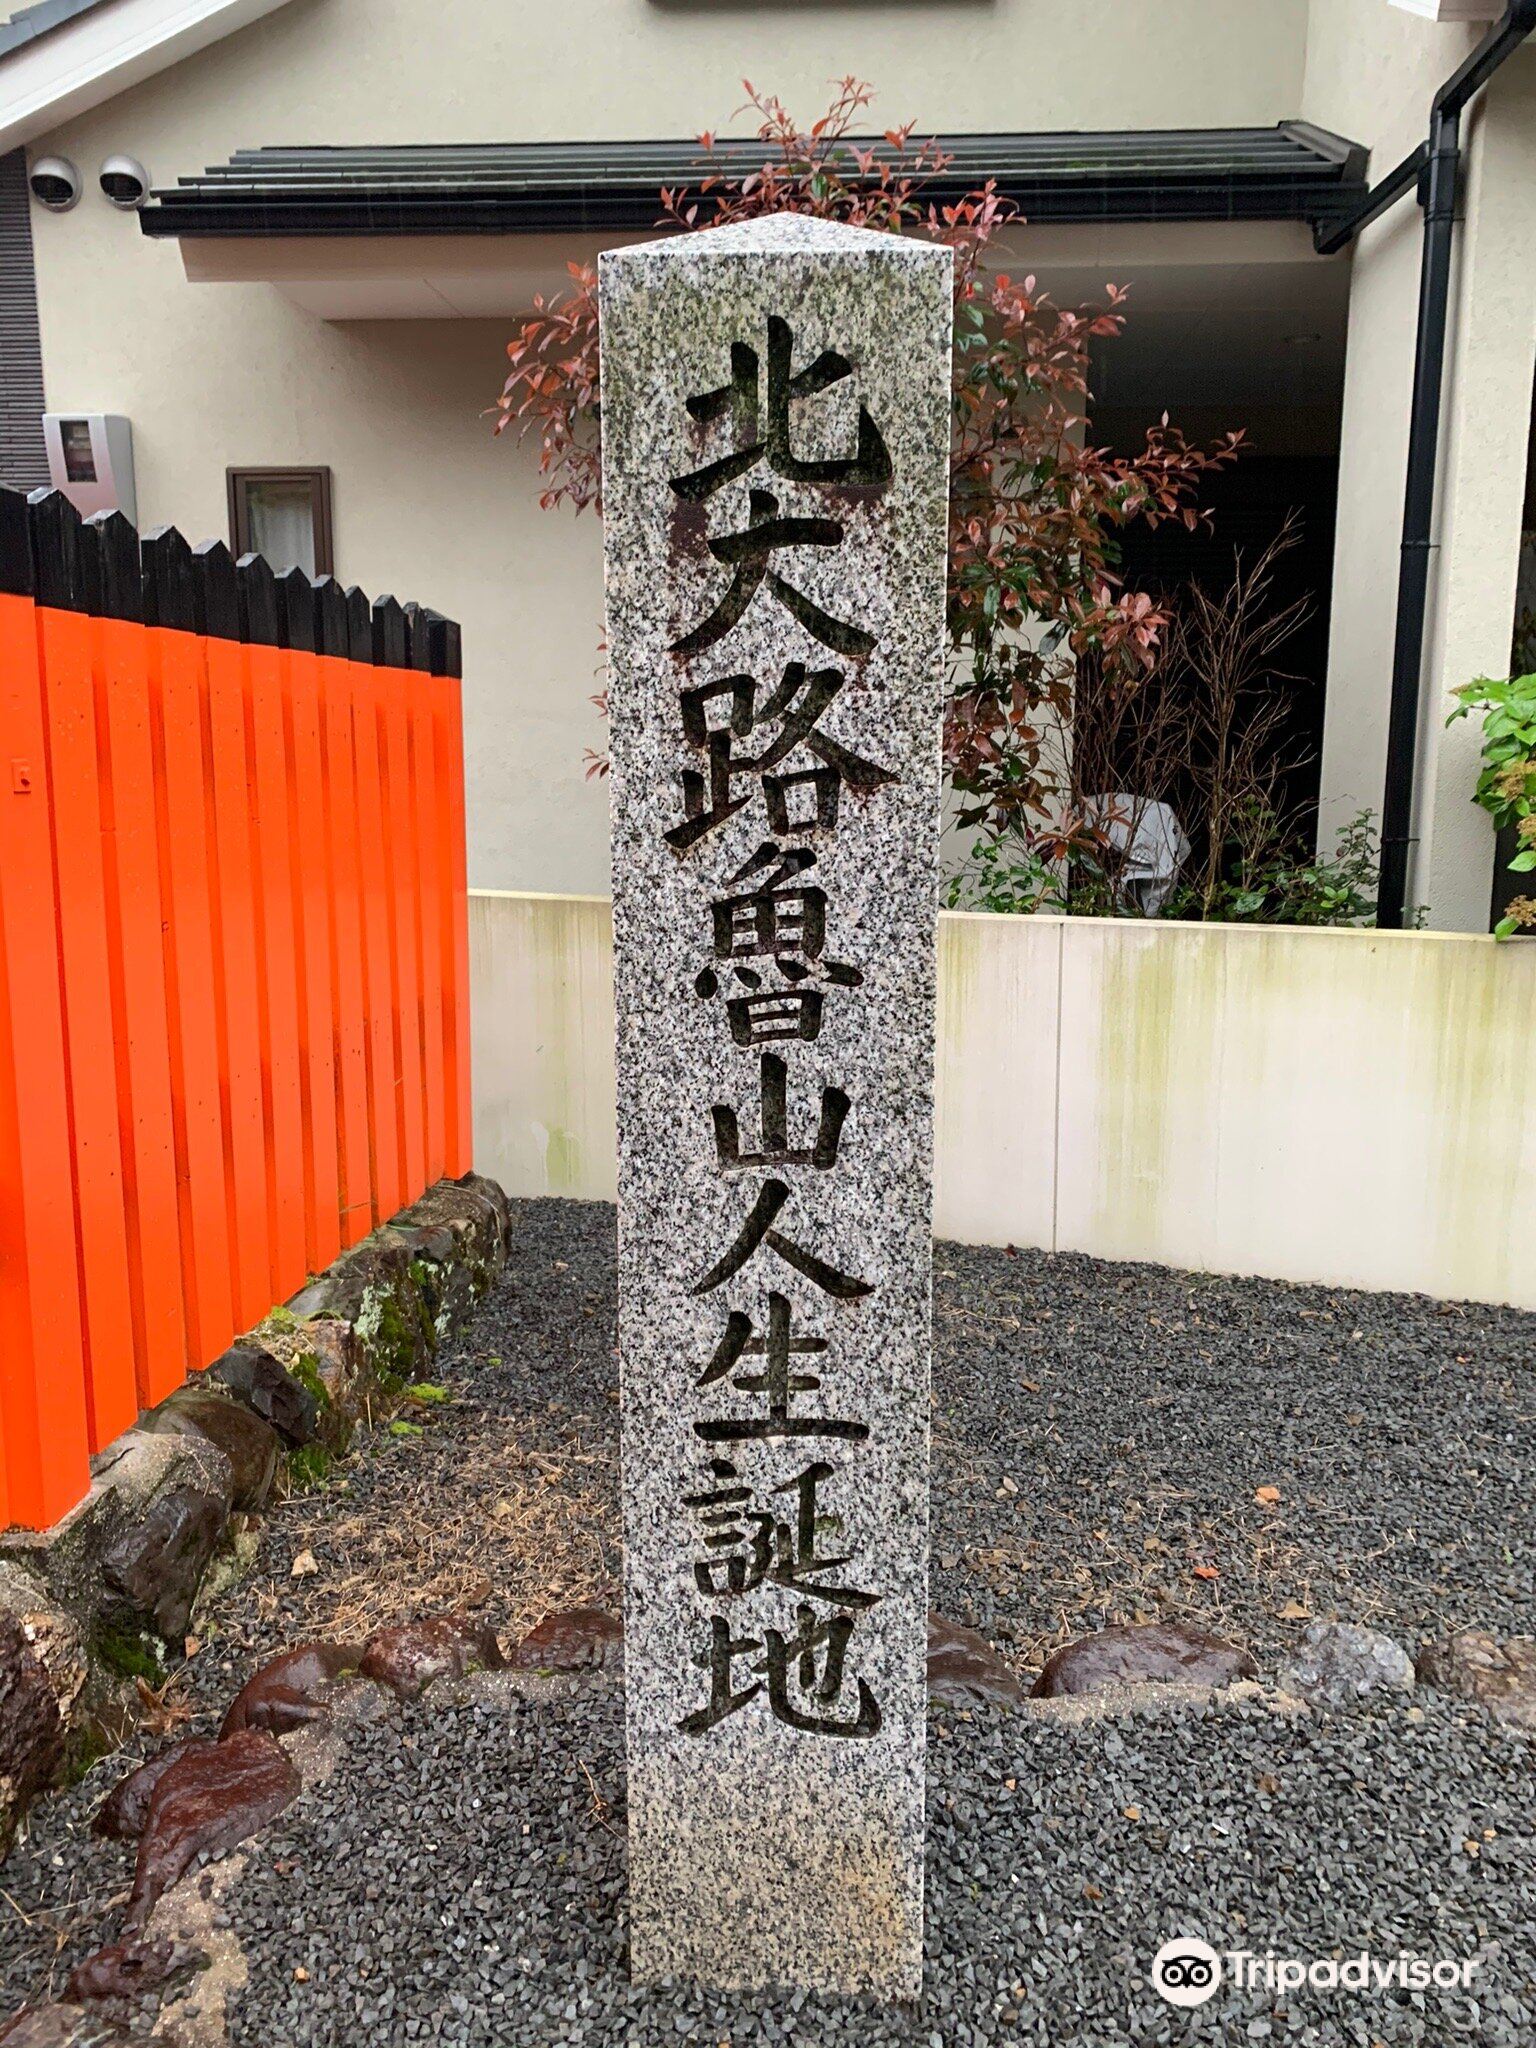 Birthplace of Kitaoji Rosanjin attraction reviews - Birthplace of Kitaoji tickets - Birthplace of Kitaoji Rosanjin discounts Birthplace of Kitaoji Rosanjin transportation, address, opening - attractions, hotels, and food